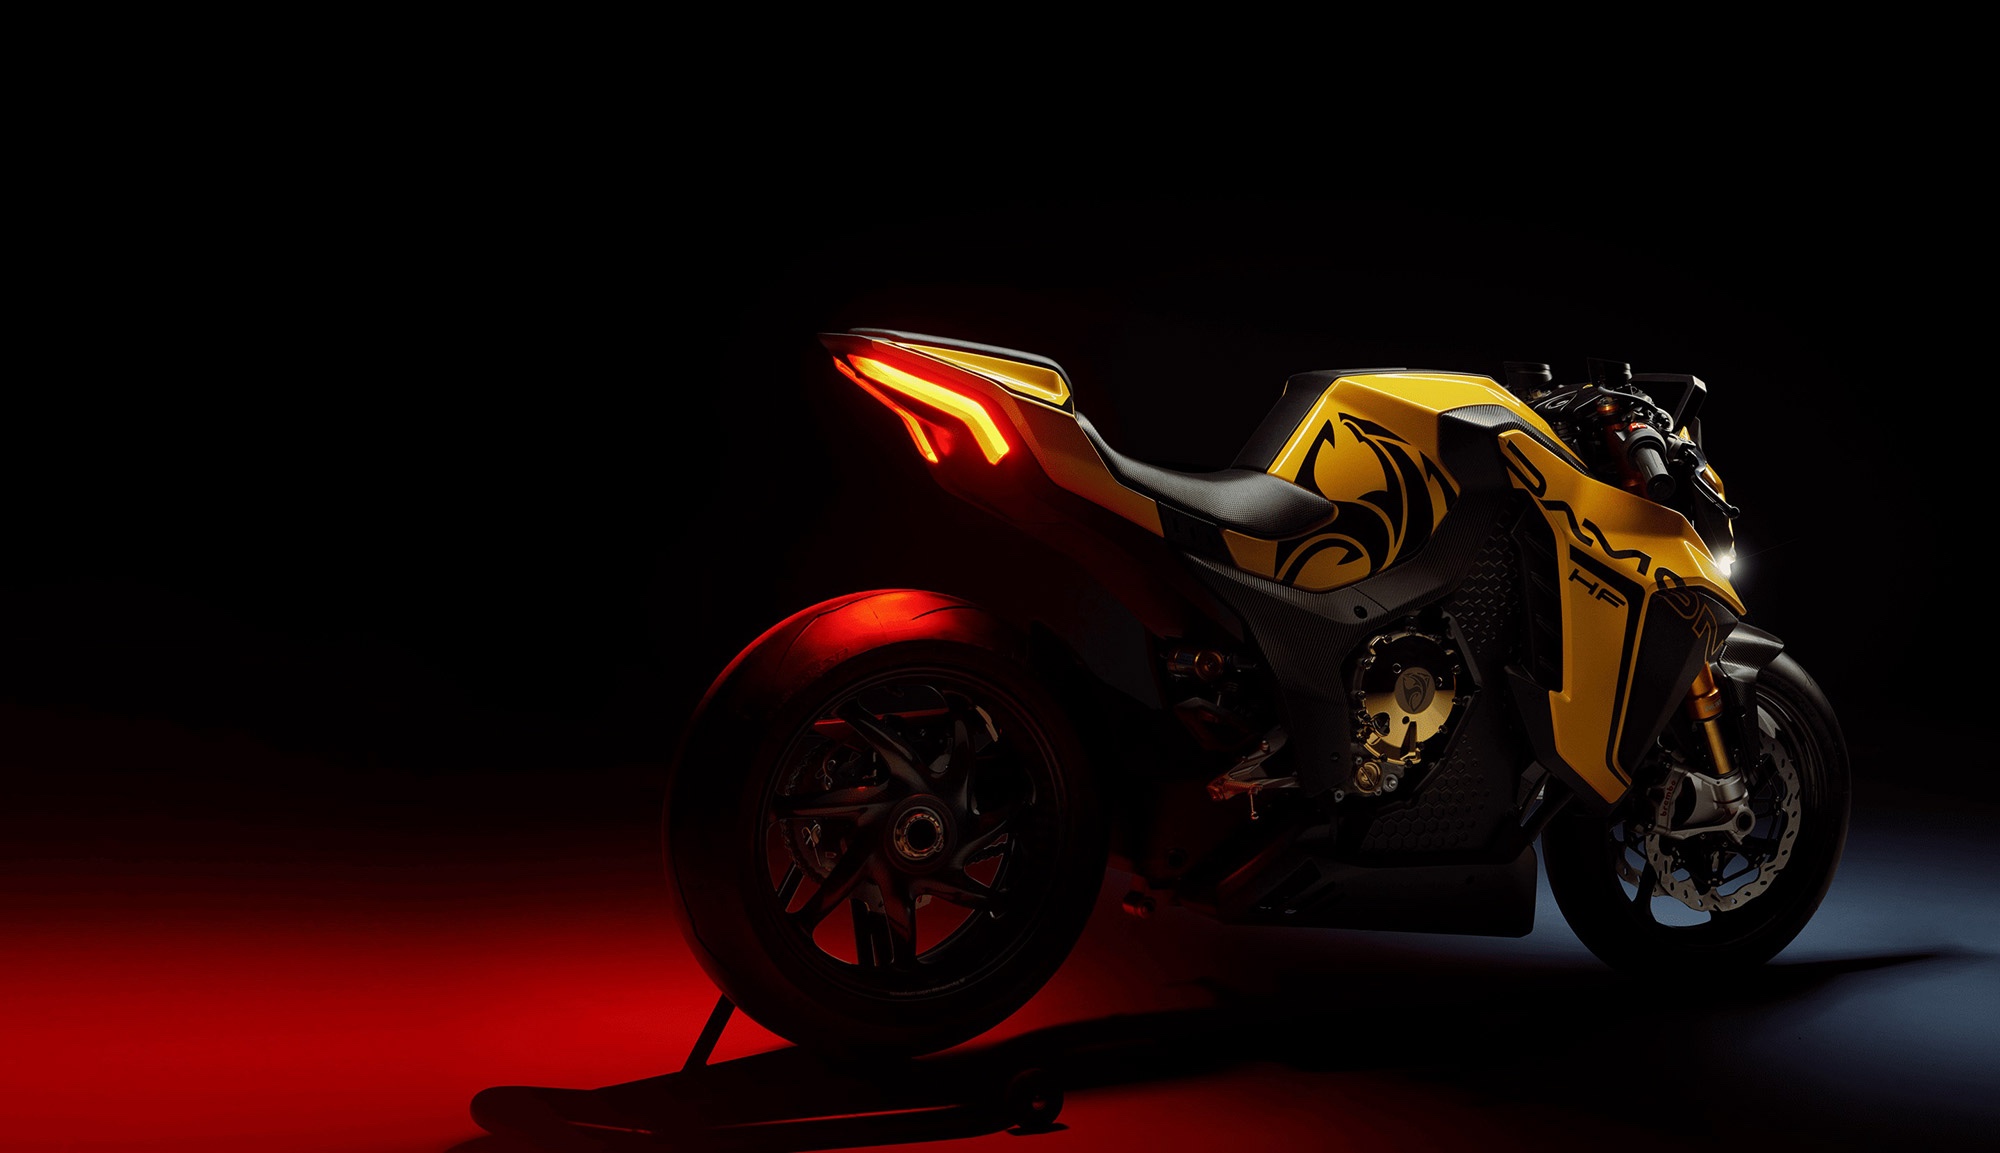 A rear-quarter view of an electric motorcycle called the Hyperfighter.